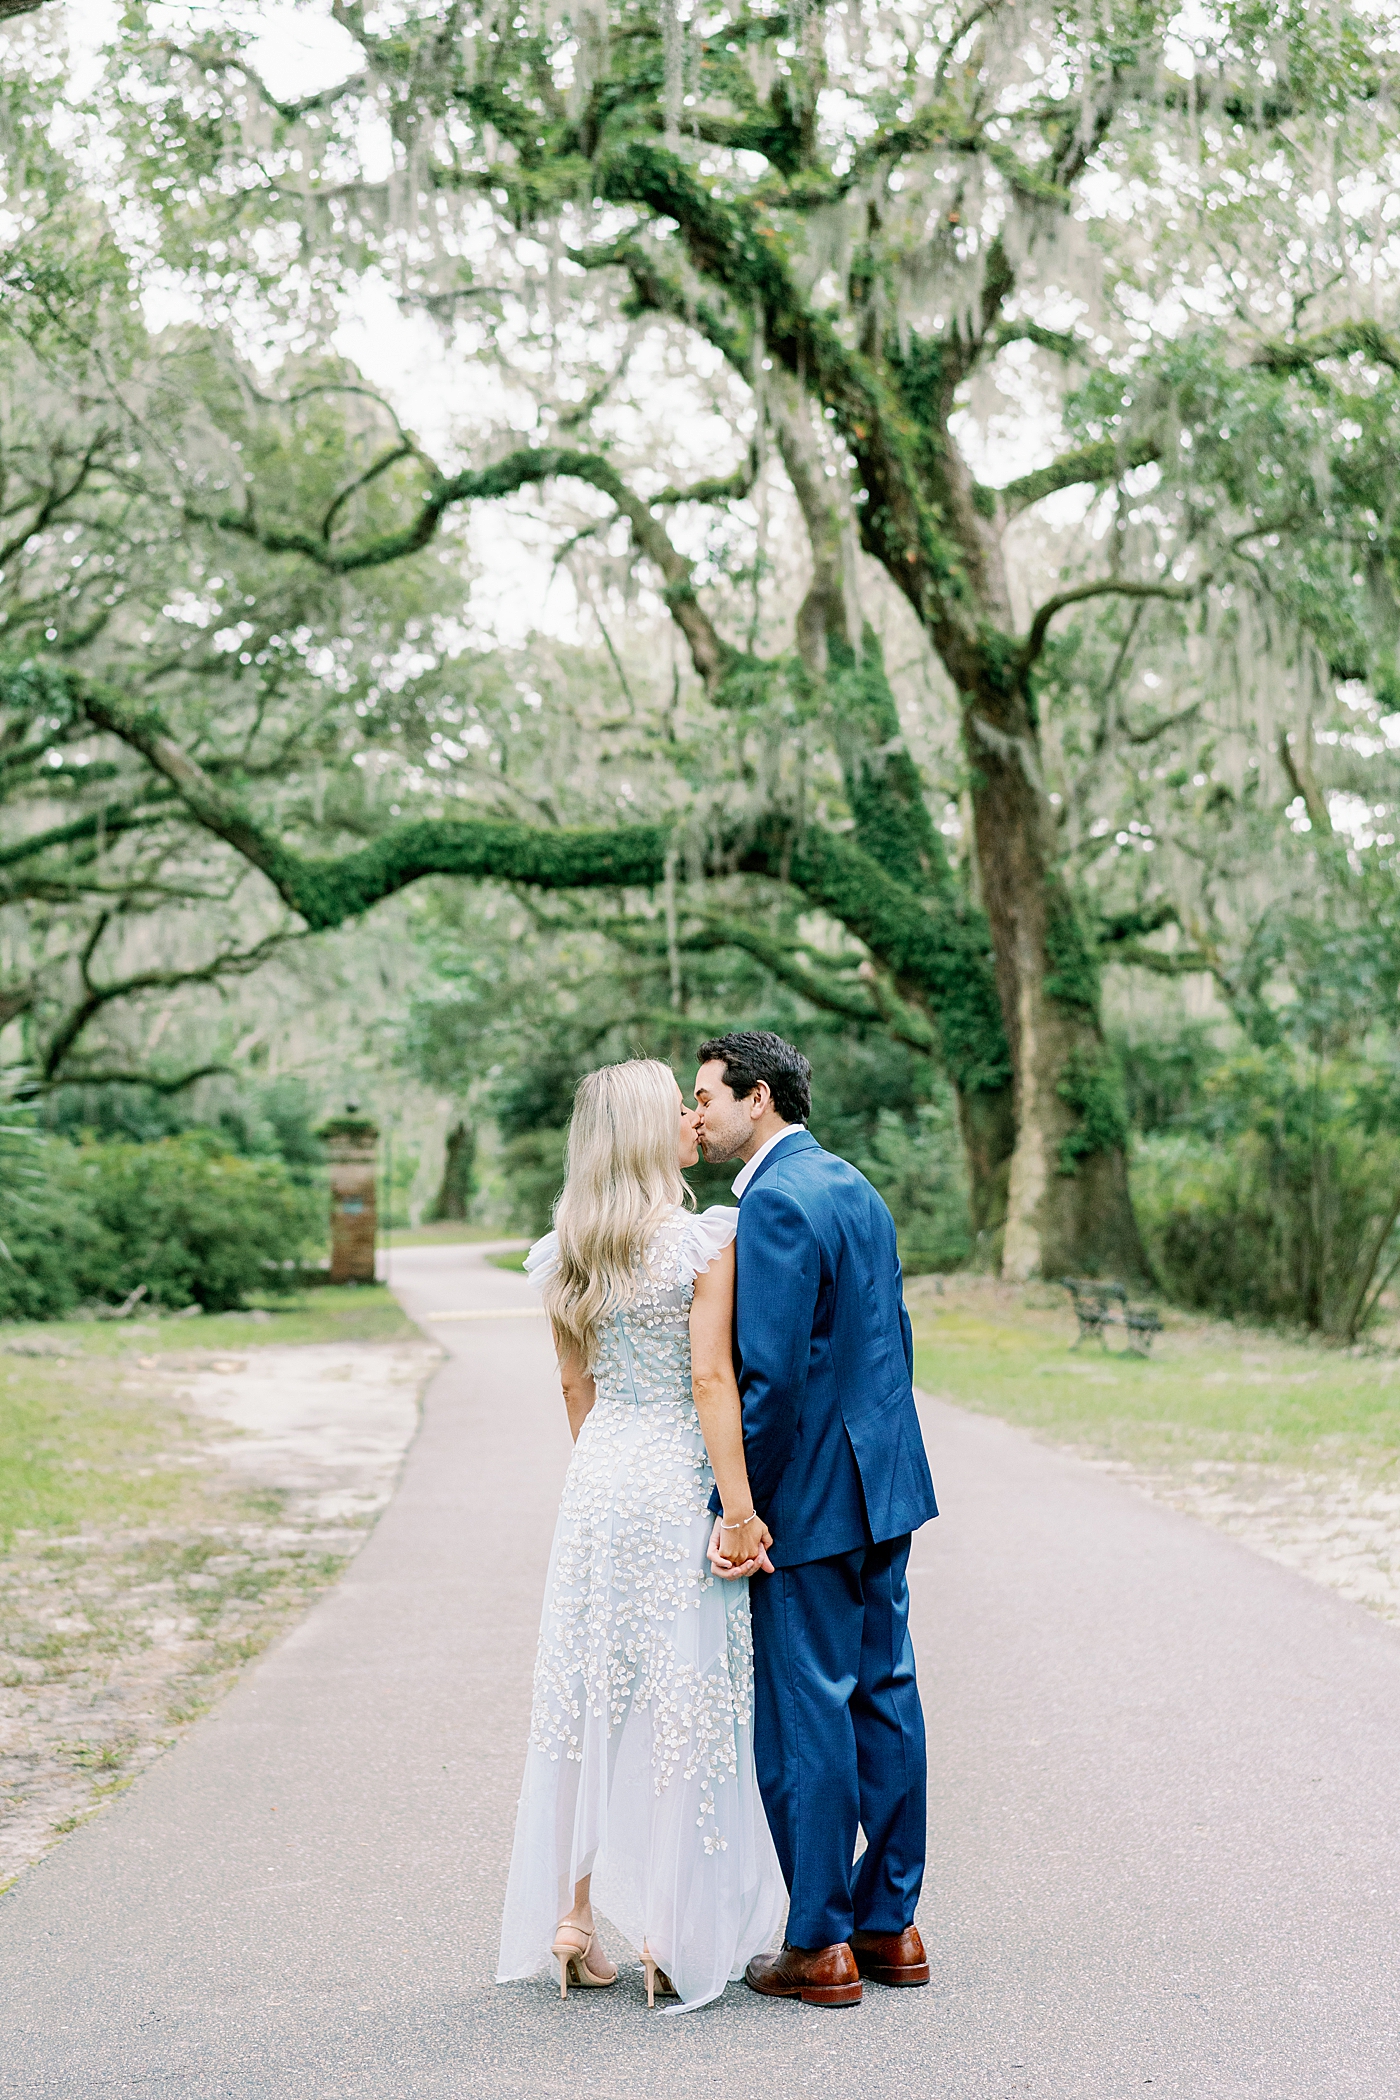 Couple kissing walking on a path | Image by Annie Laura Photo